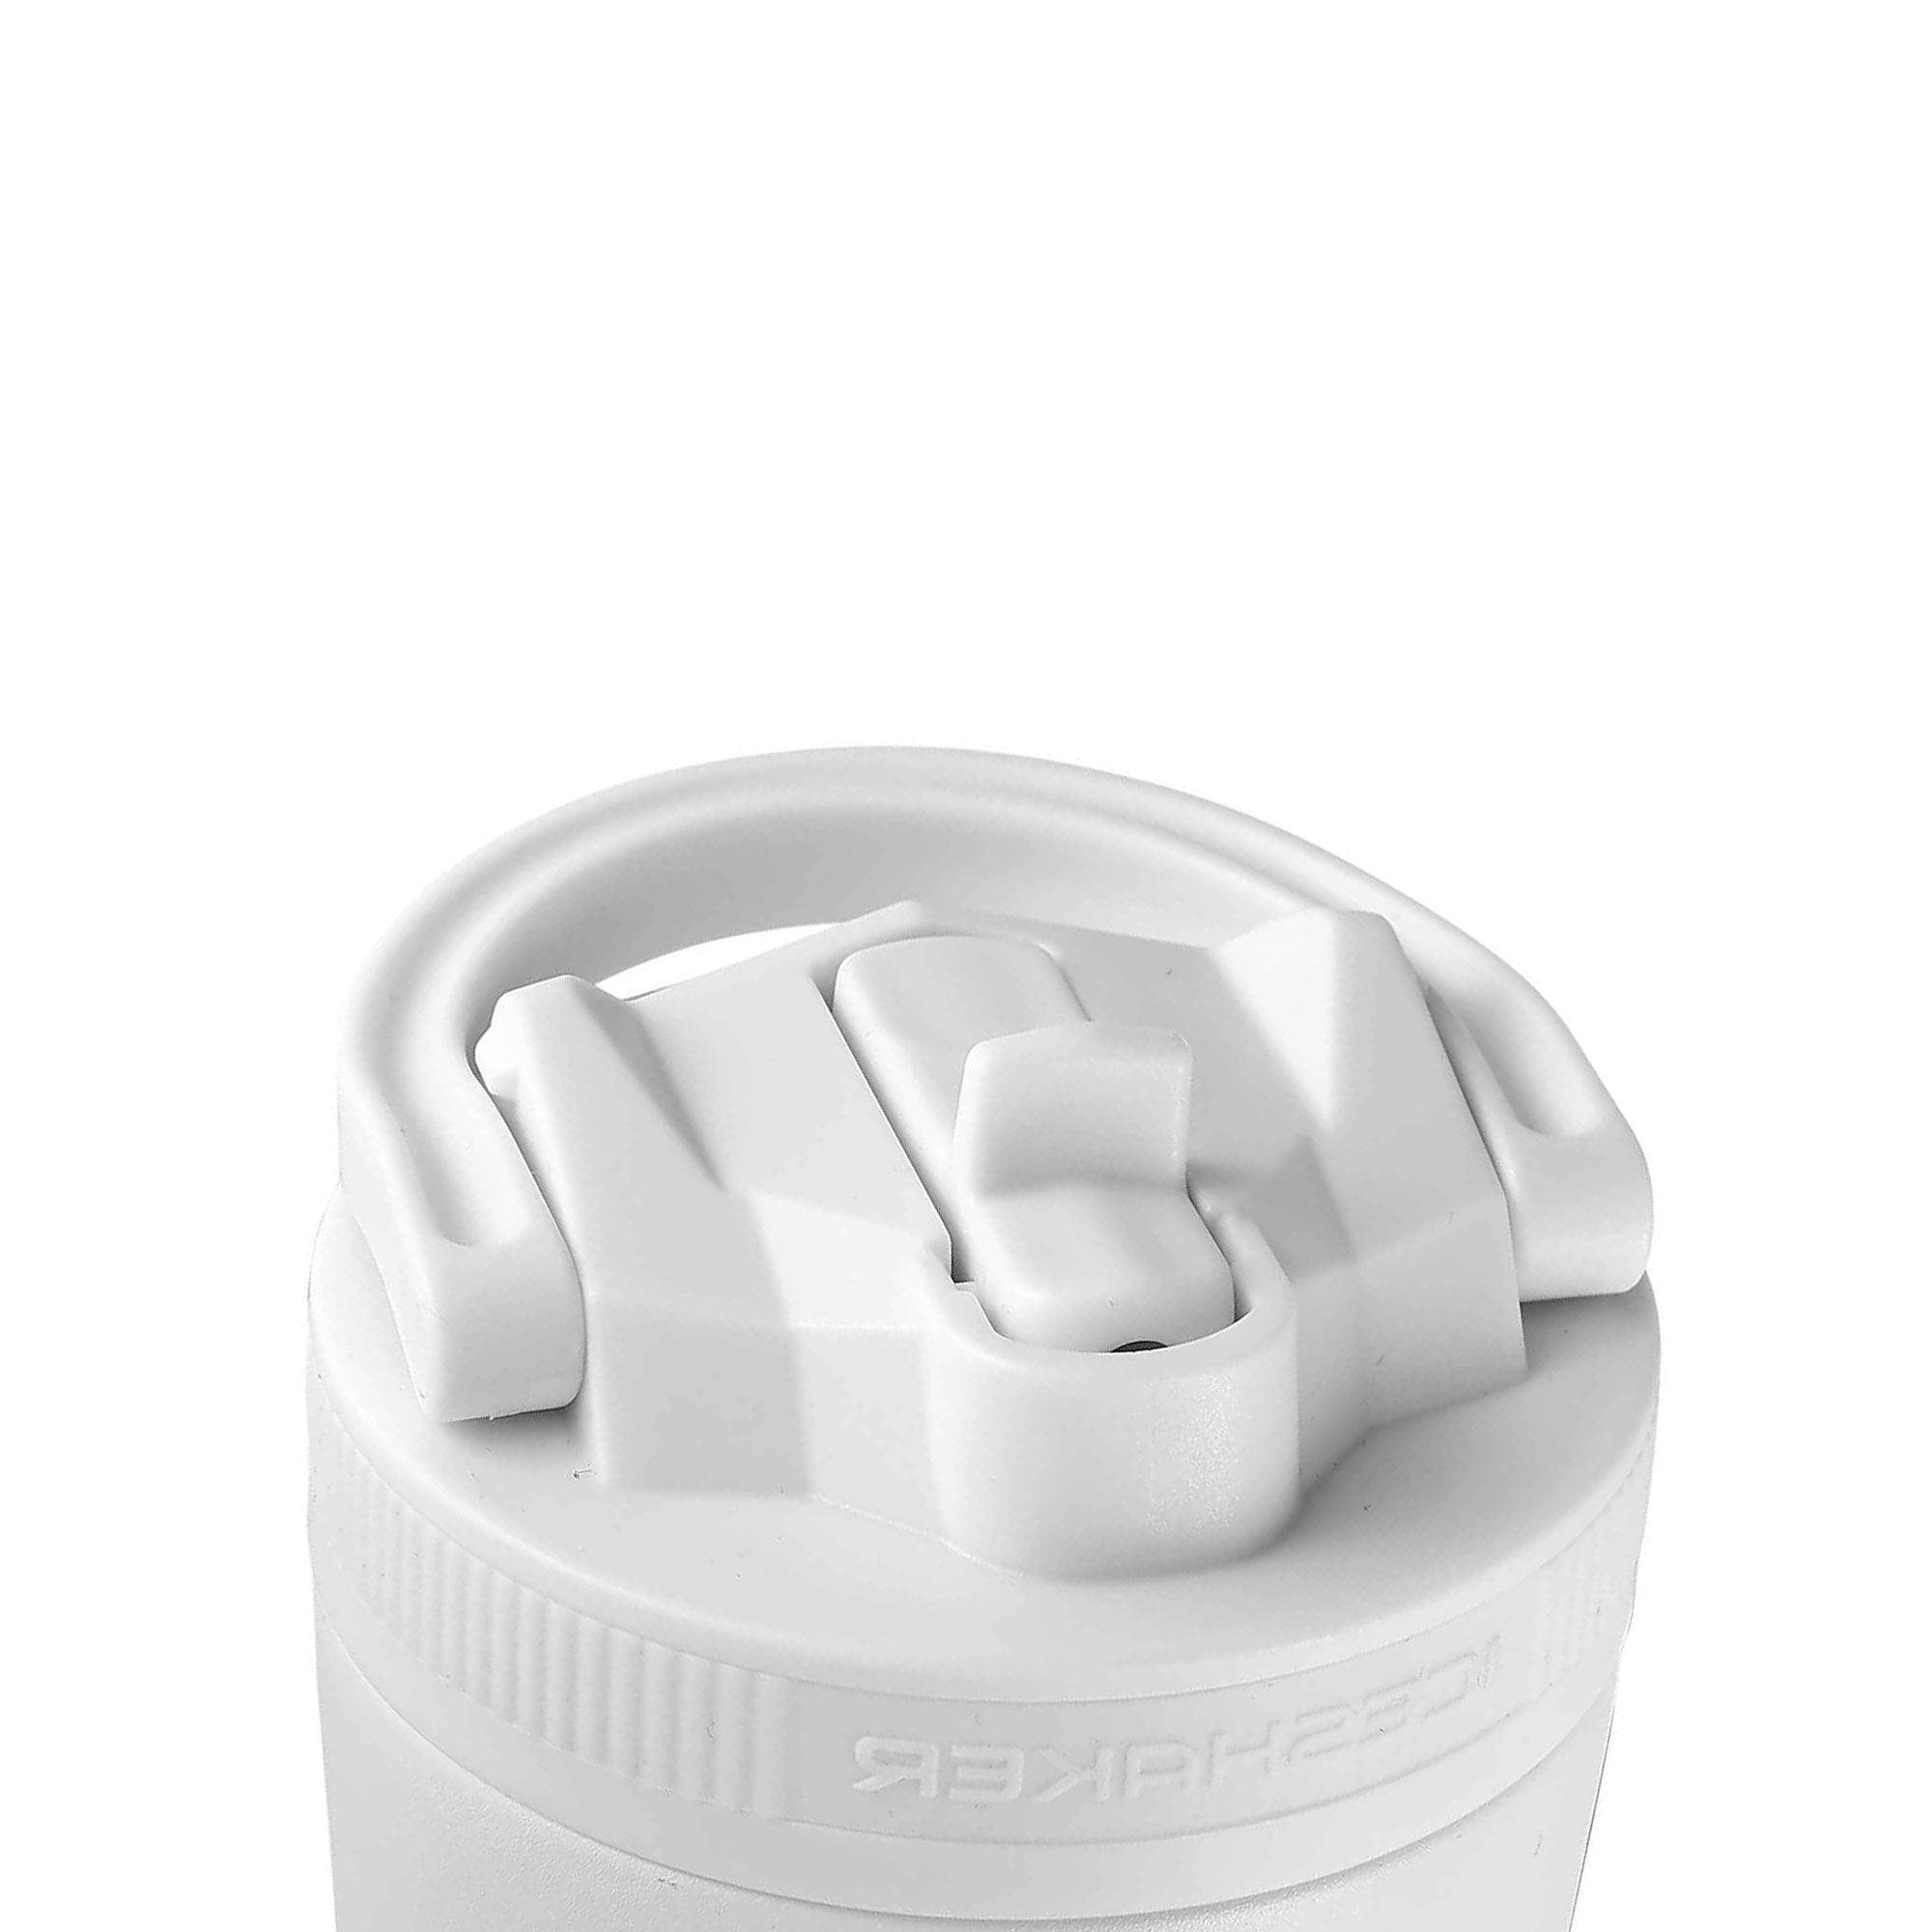 26oz Sport Bottle Lid & Internal Straw - White Lid with White Band